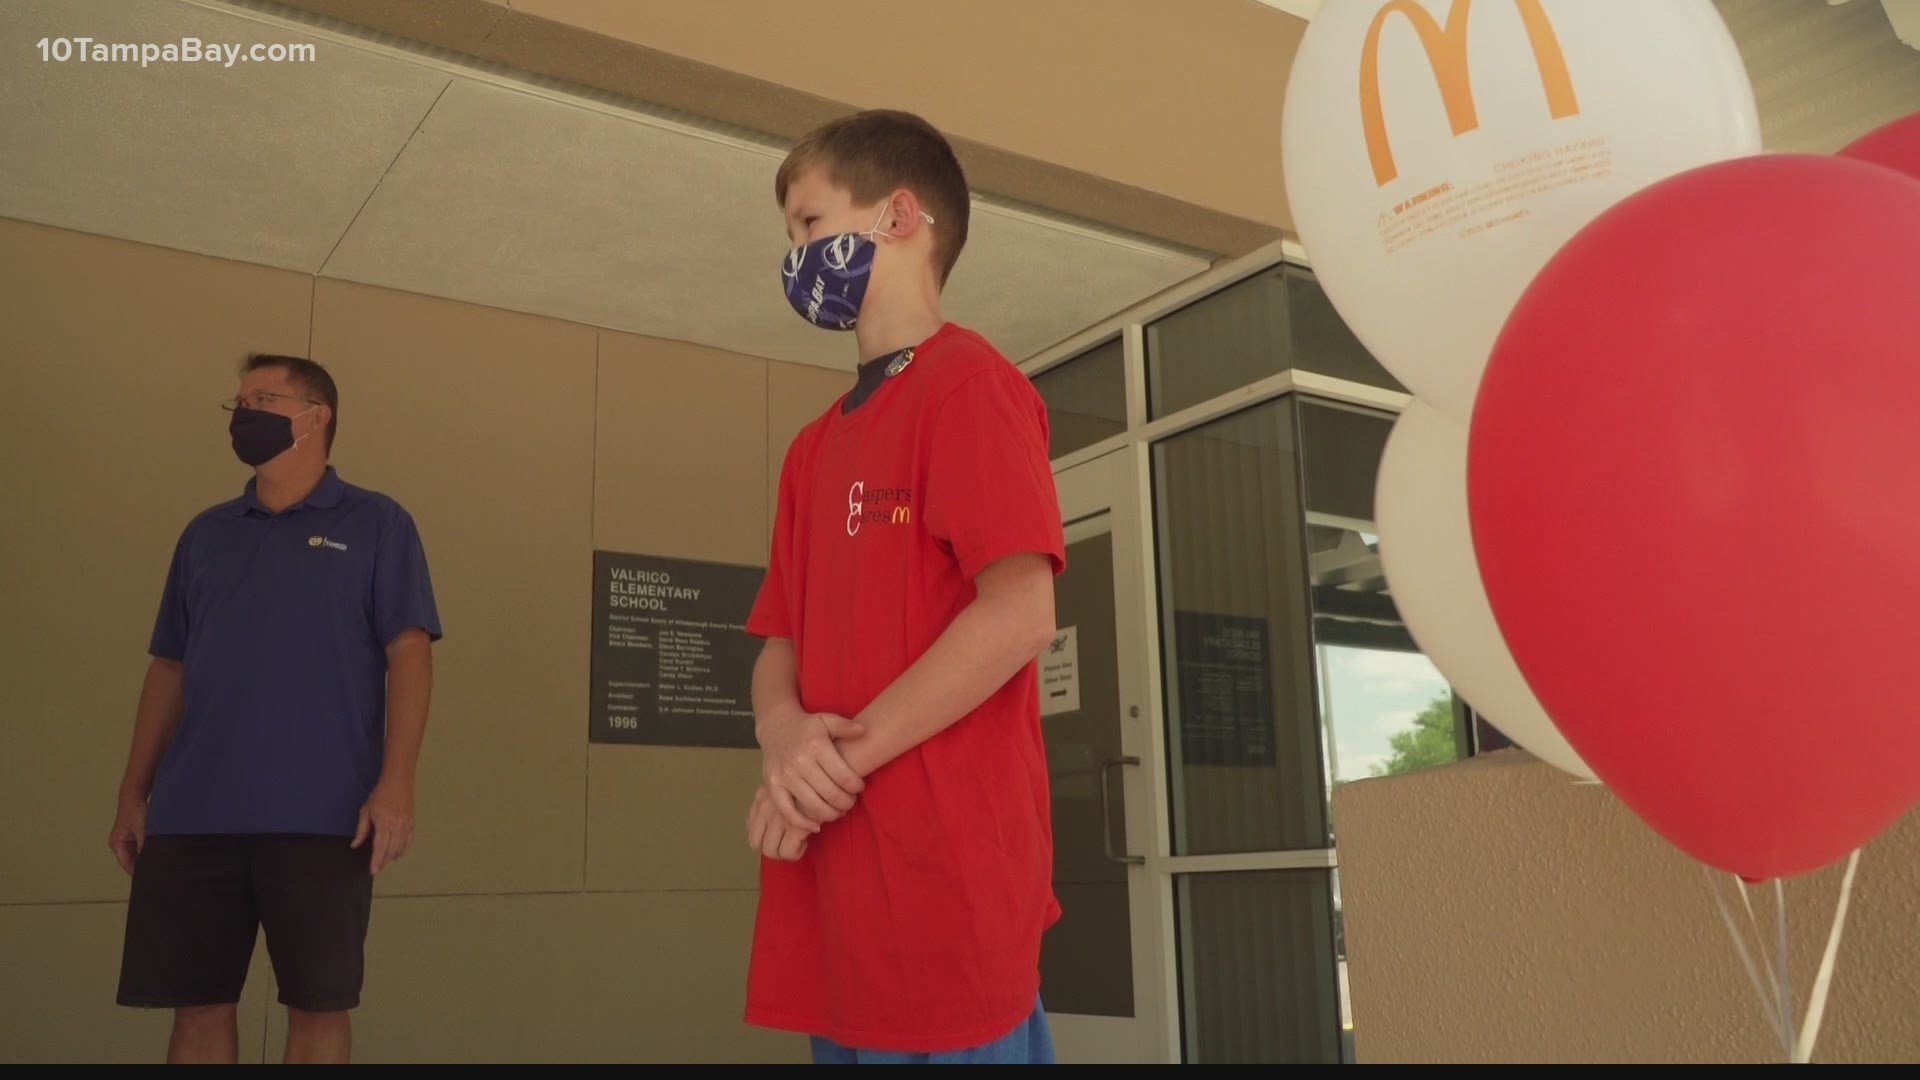 The Ronald McDonald House Charity gave the child a special birthday surprise after getting word of his selfless act.